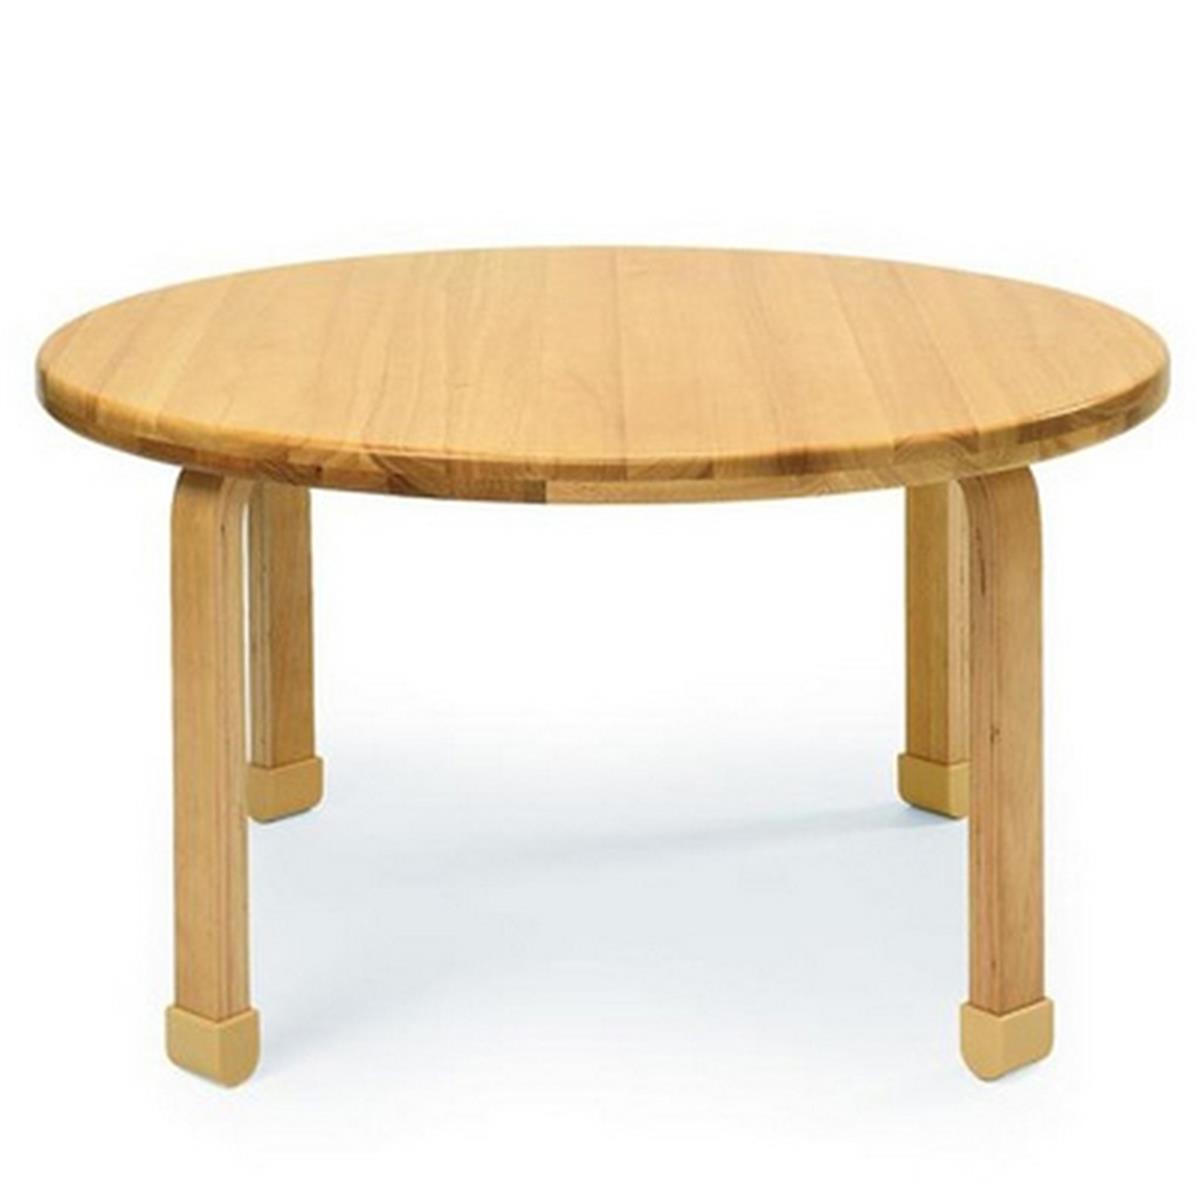 Angeles Ab7820l16 36 In. Dia. Round Natural Wood Table With 16 In. Legs